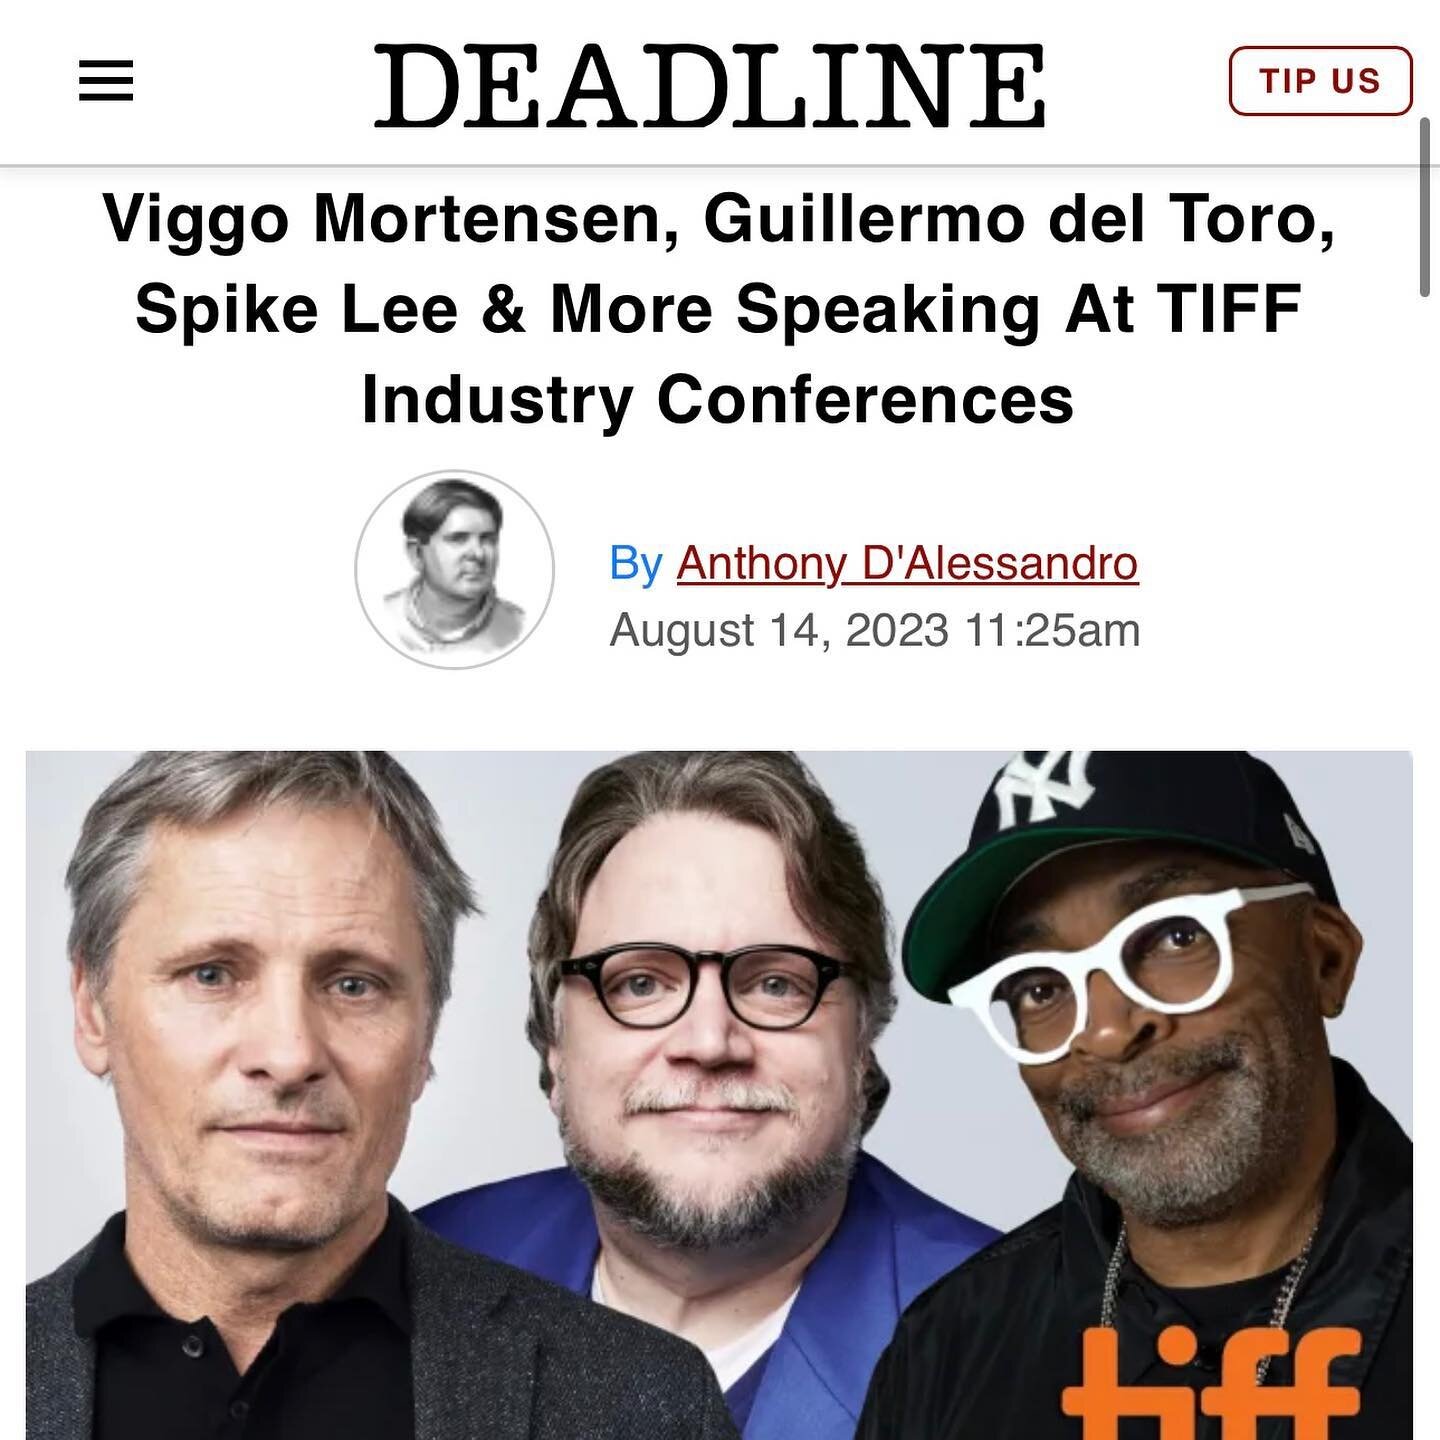 TIFF News! Viggo Mortensen is joining the lineup of speakers for TIFF industry conferences to discuss his latest directorial endeavour, The Dead Don&rsquo;t Hurt. 

The Dead Don&rsquo;t Hurt is having its World Premiere at TIFF as part of the Special